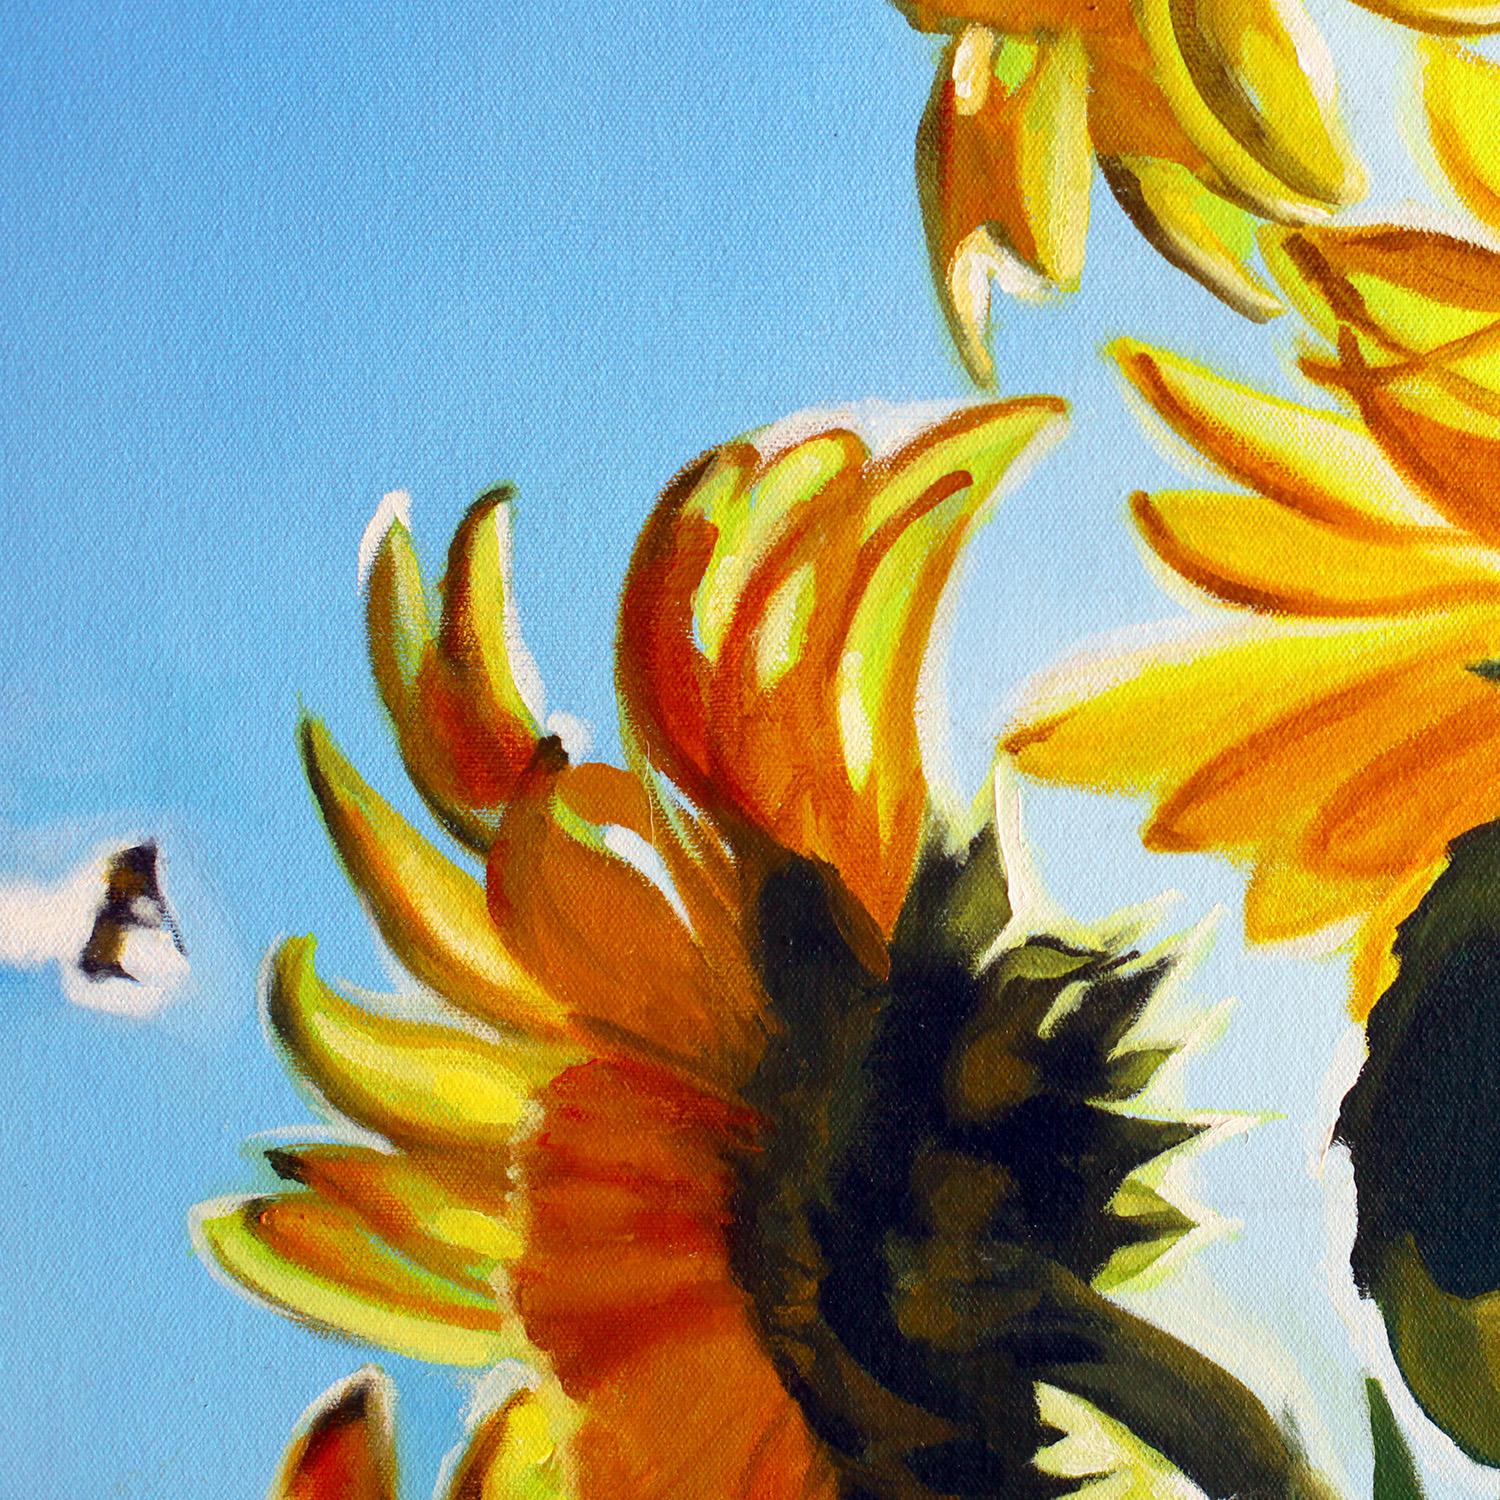 This is a one of a kind original painting by local San Diego artist, Bronle Crosby. Its dimensions are 48 x 48 x 2.75. It is unframed. 

This large scale oil on canvas painting depicts growing sunflowers. The artist uses precise details depicting